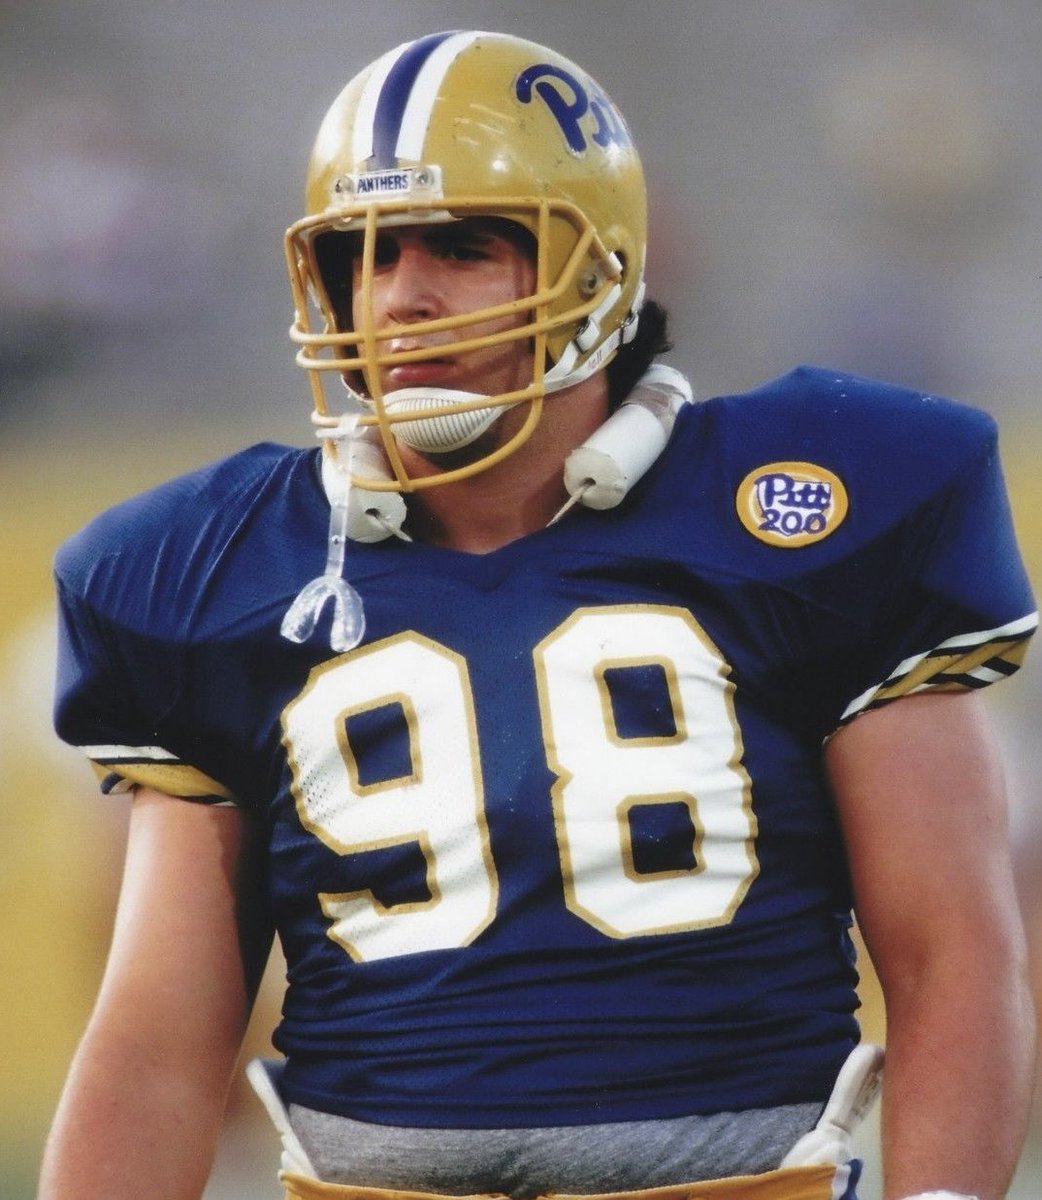 One of my favorite Pitt draft stories is the late, great Tony Siragusa - who didn't get drafted at all. Played 12 strong years in the NFL and won a Super Bowl as part of a physically punishing Ravens defense. Iconic on and off the field. His light still burns brightly at Pitt.